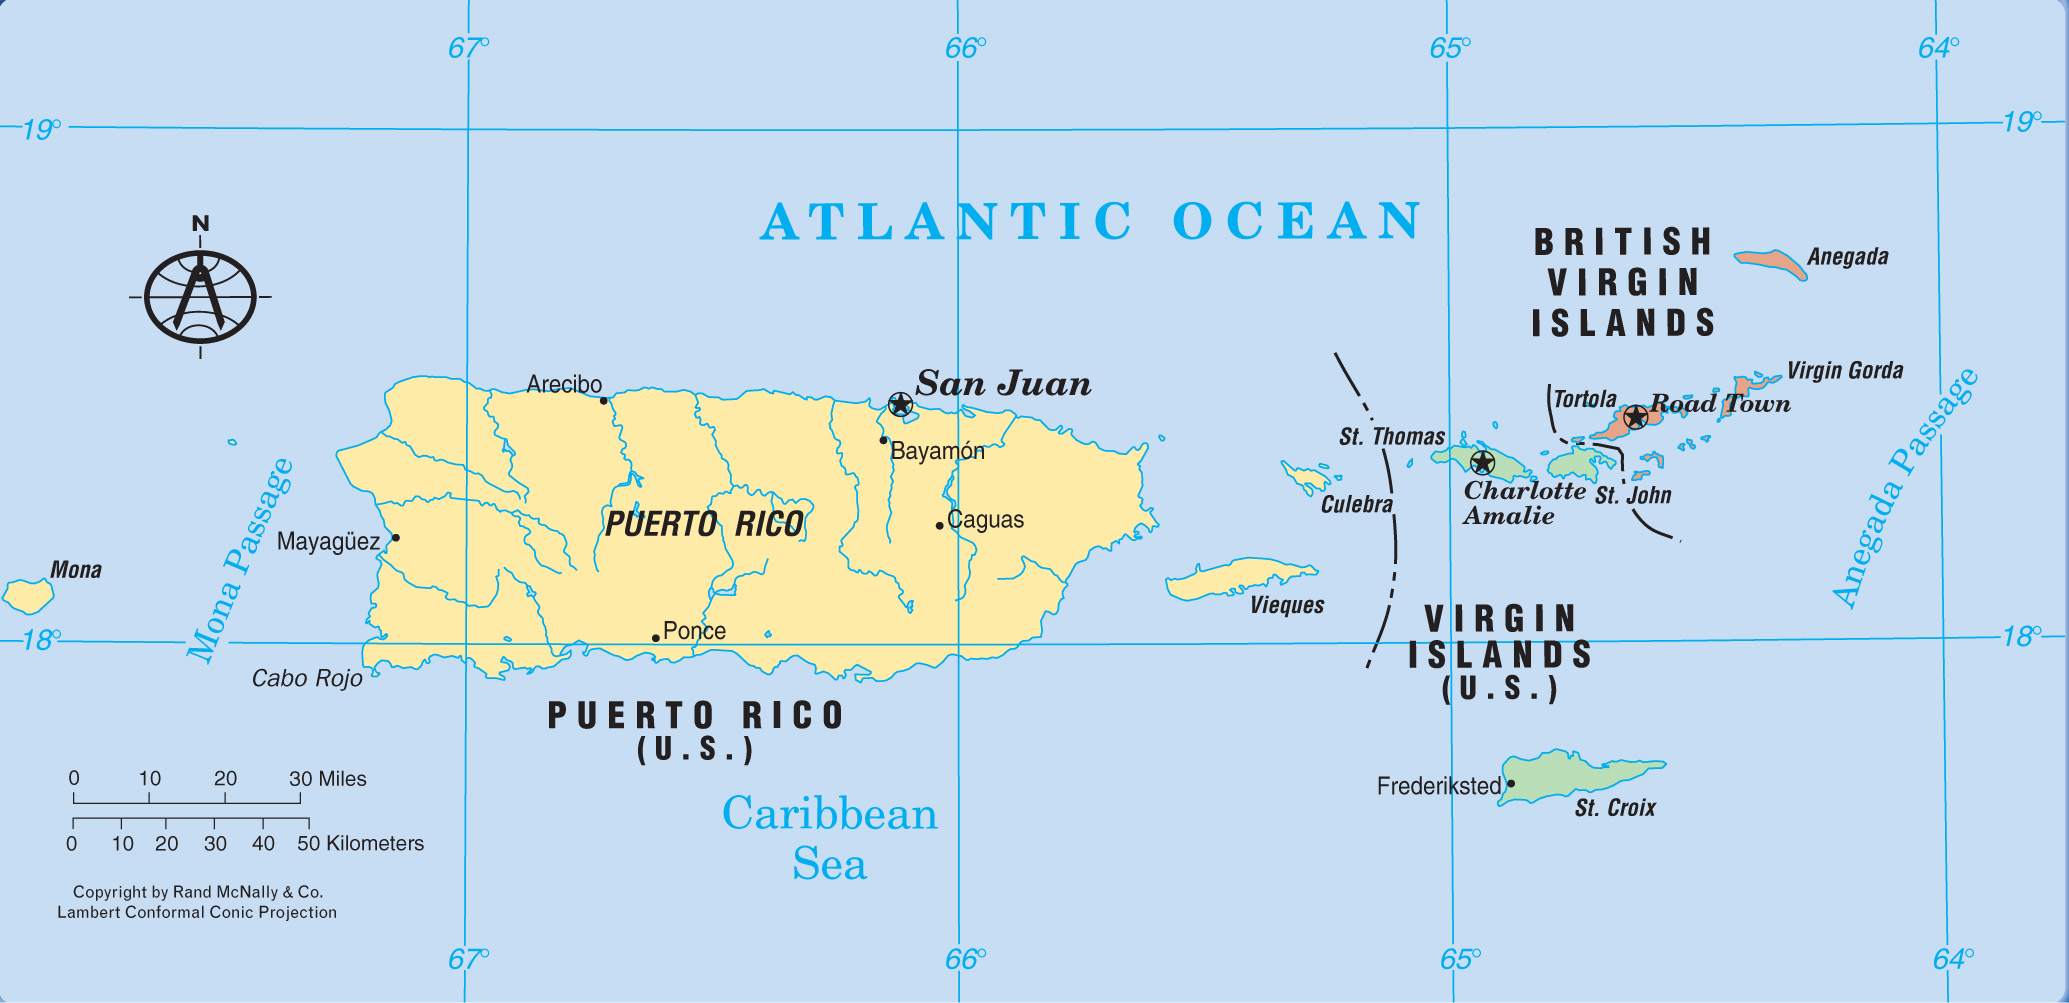 map of Puerto Rico and the U.S. Virgin Islands